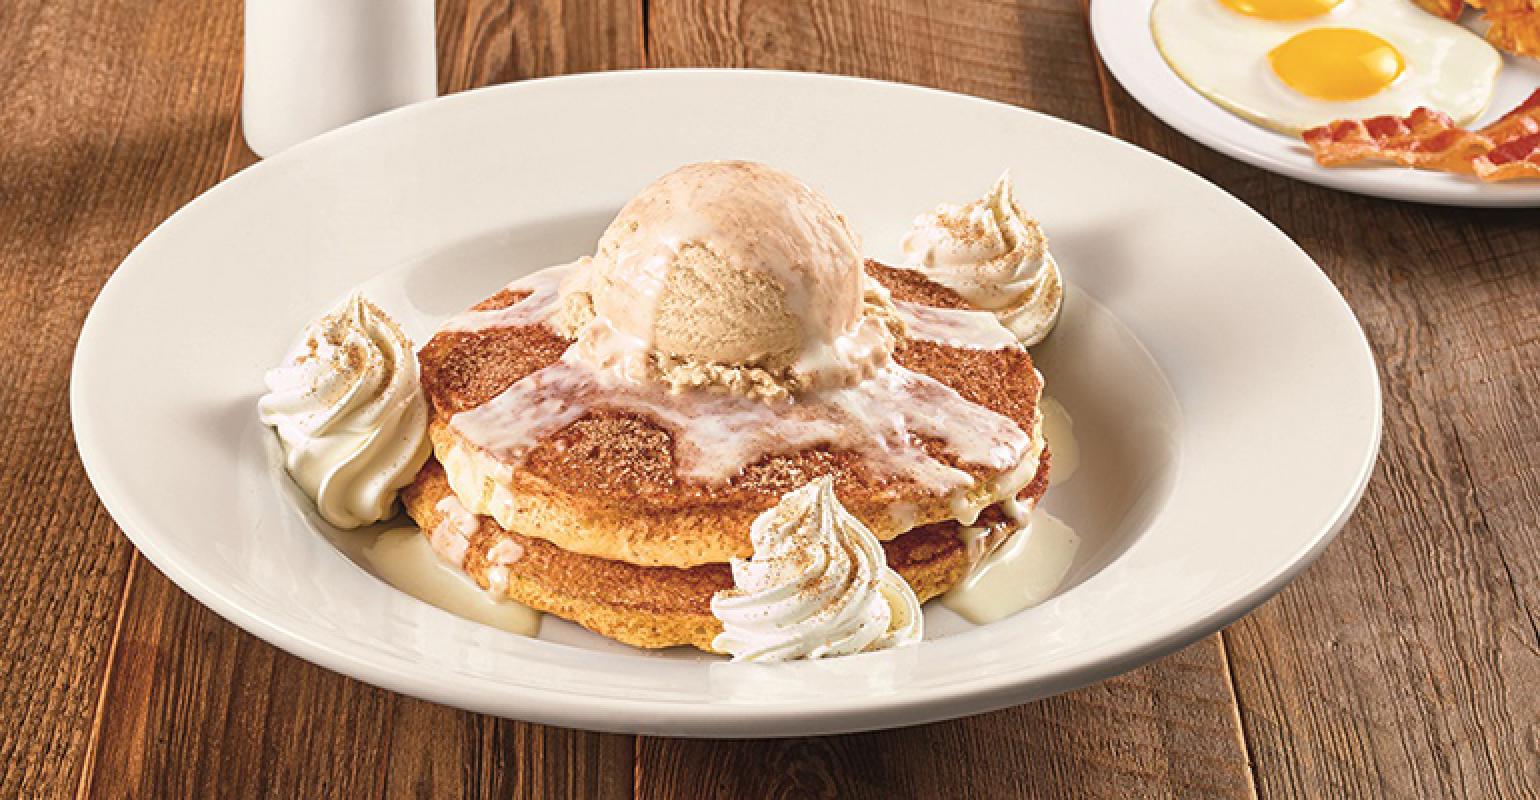 Denny's puts French (toast) accent on permanent menu